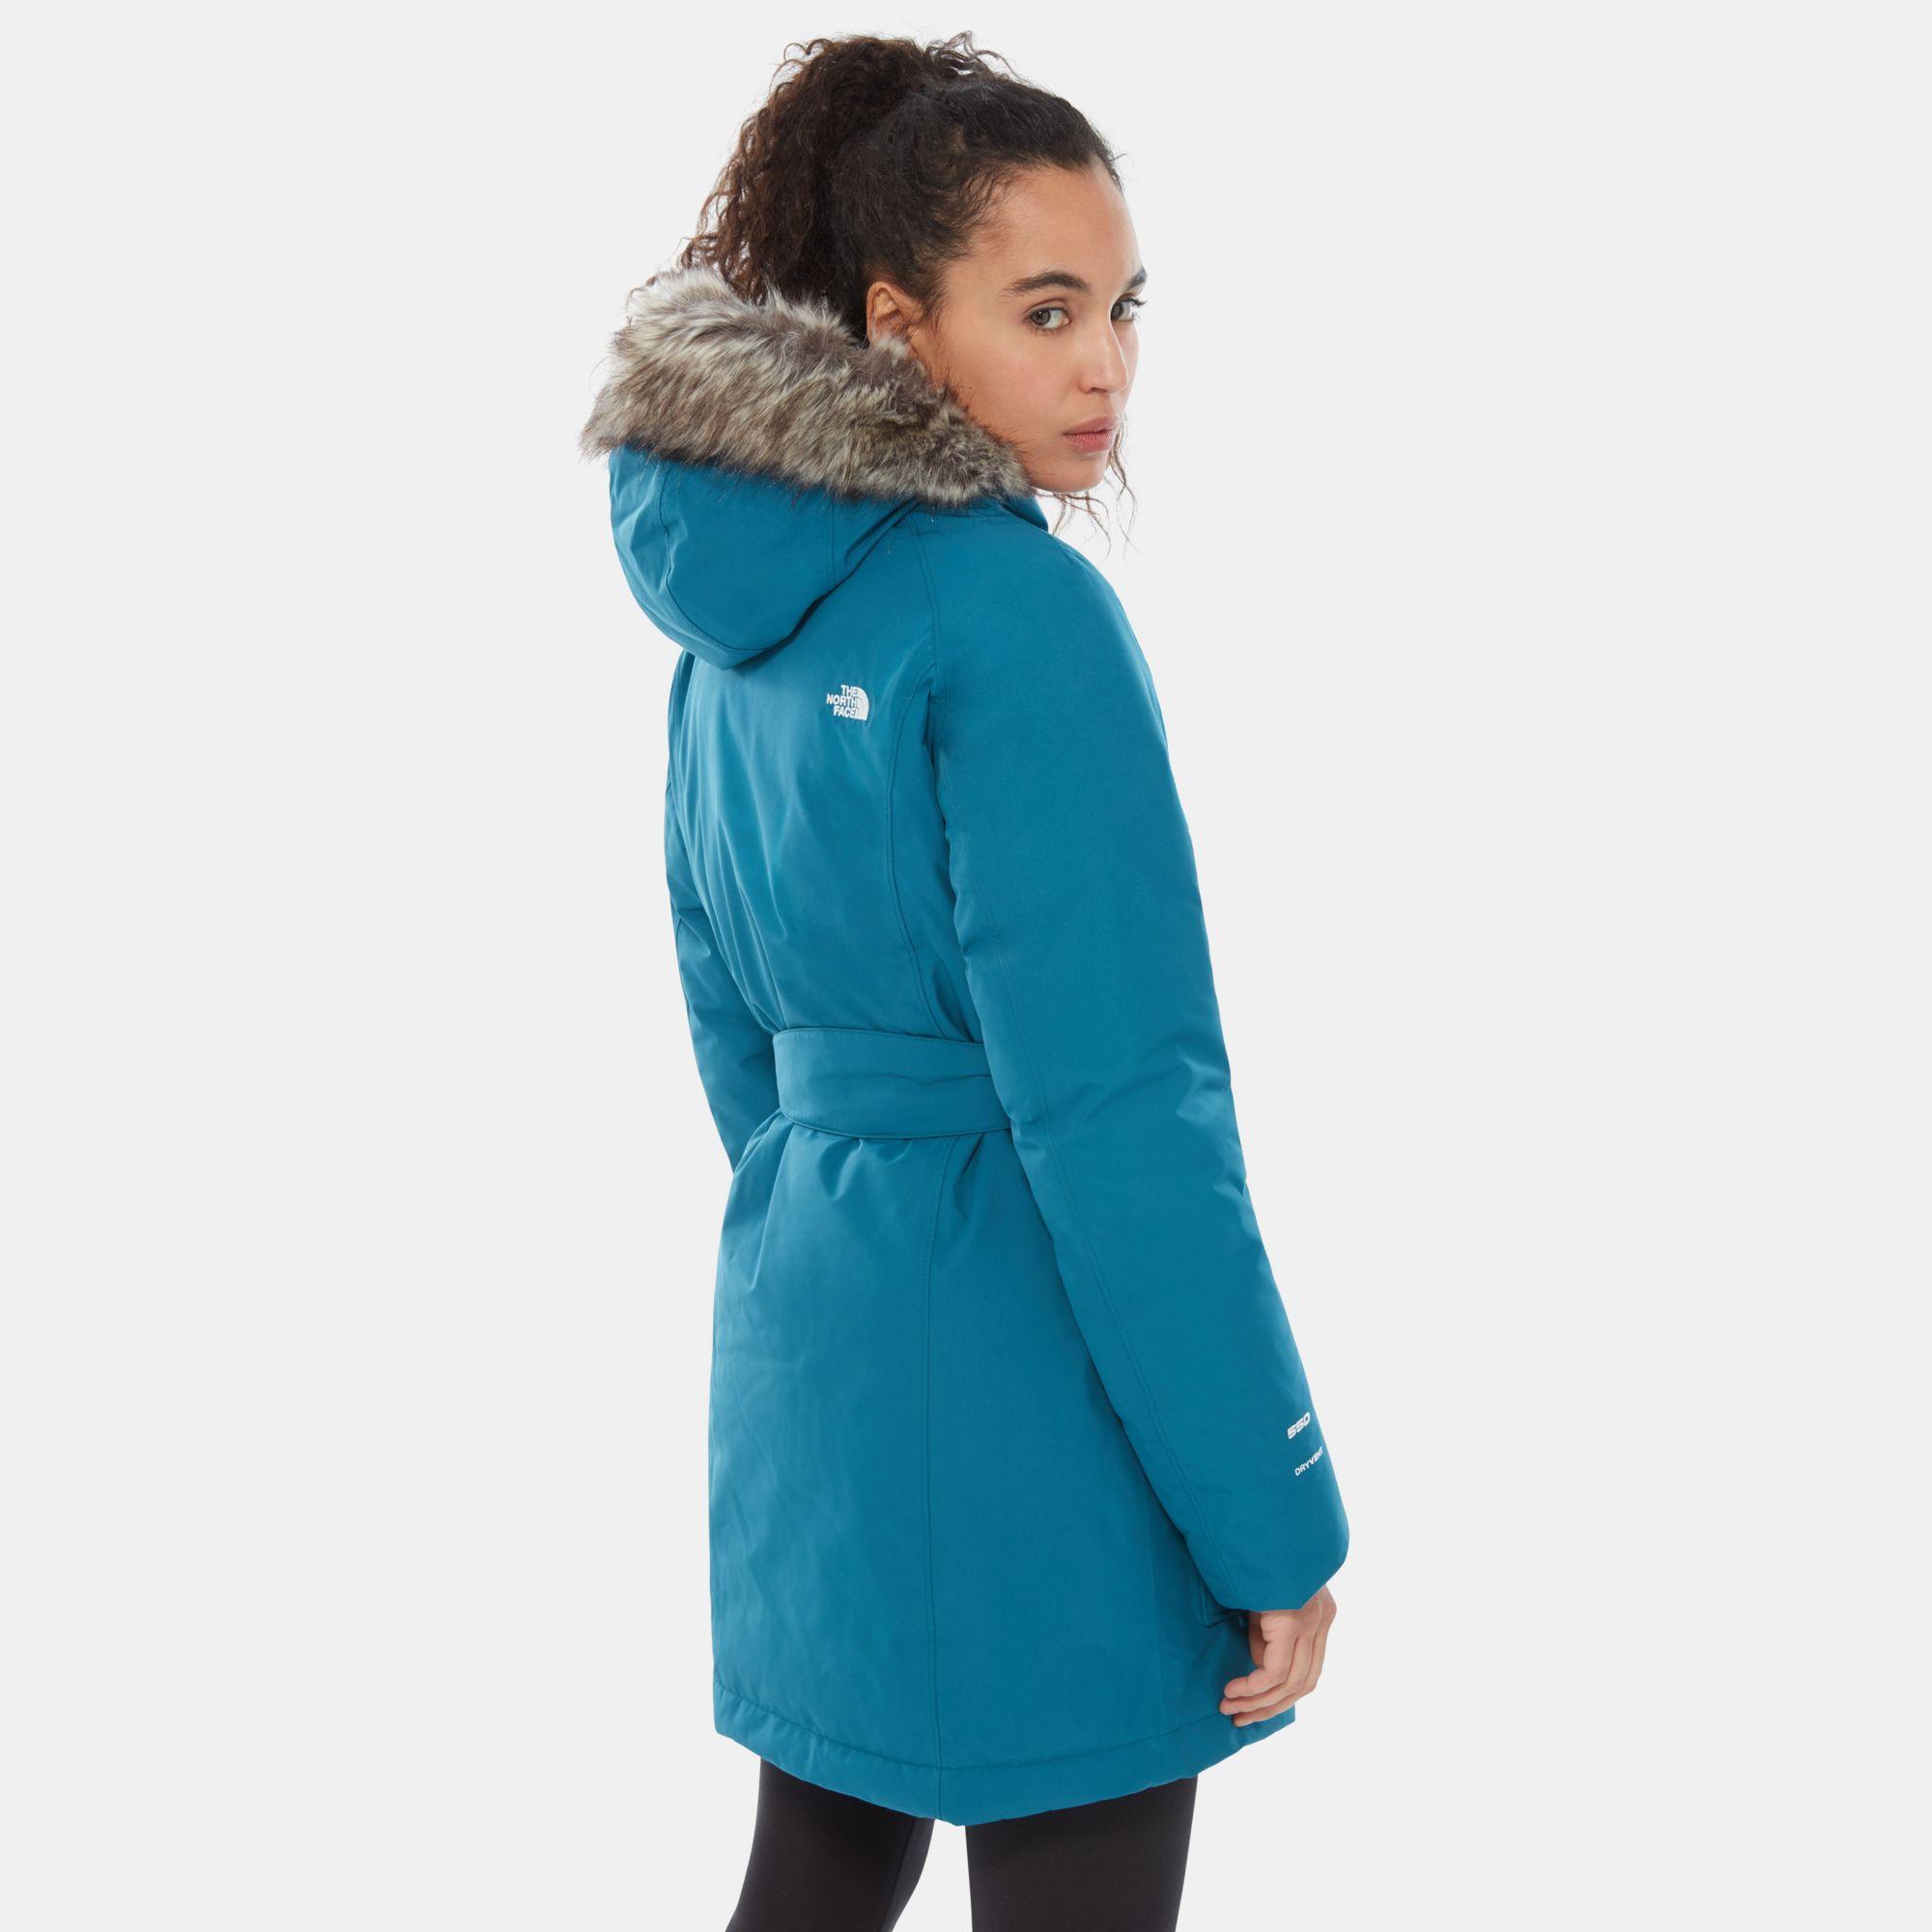 north face brooklyn parka 2 review